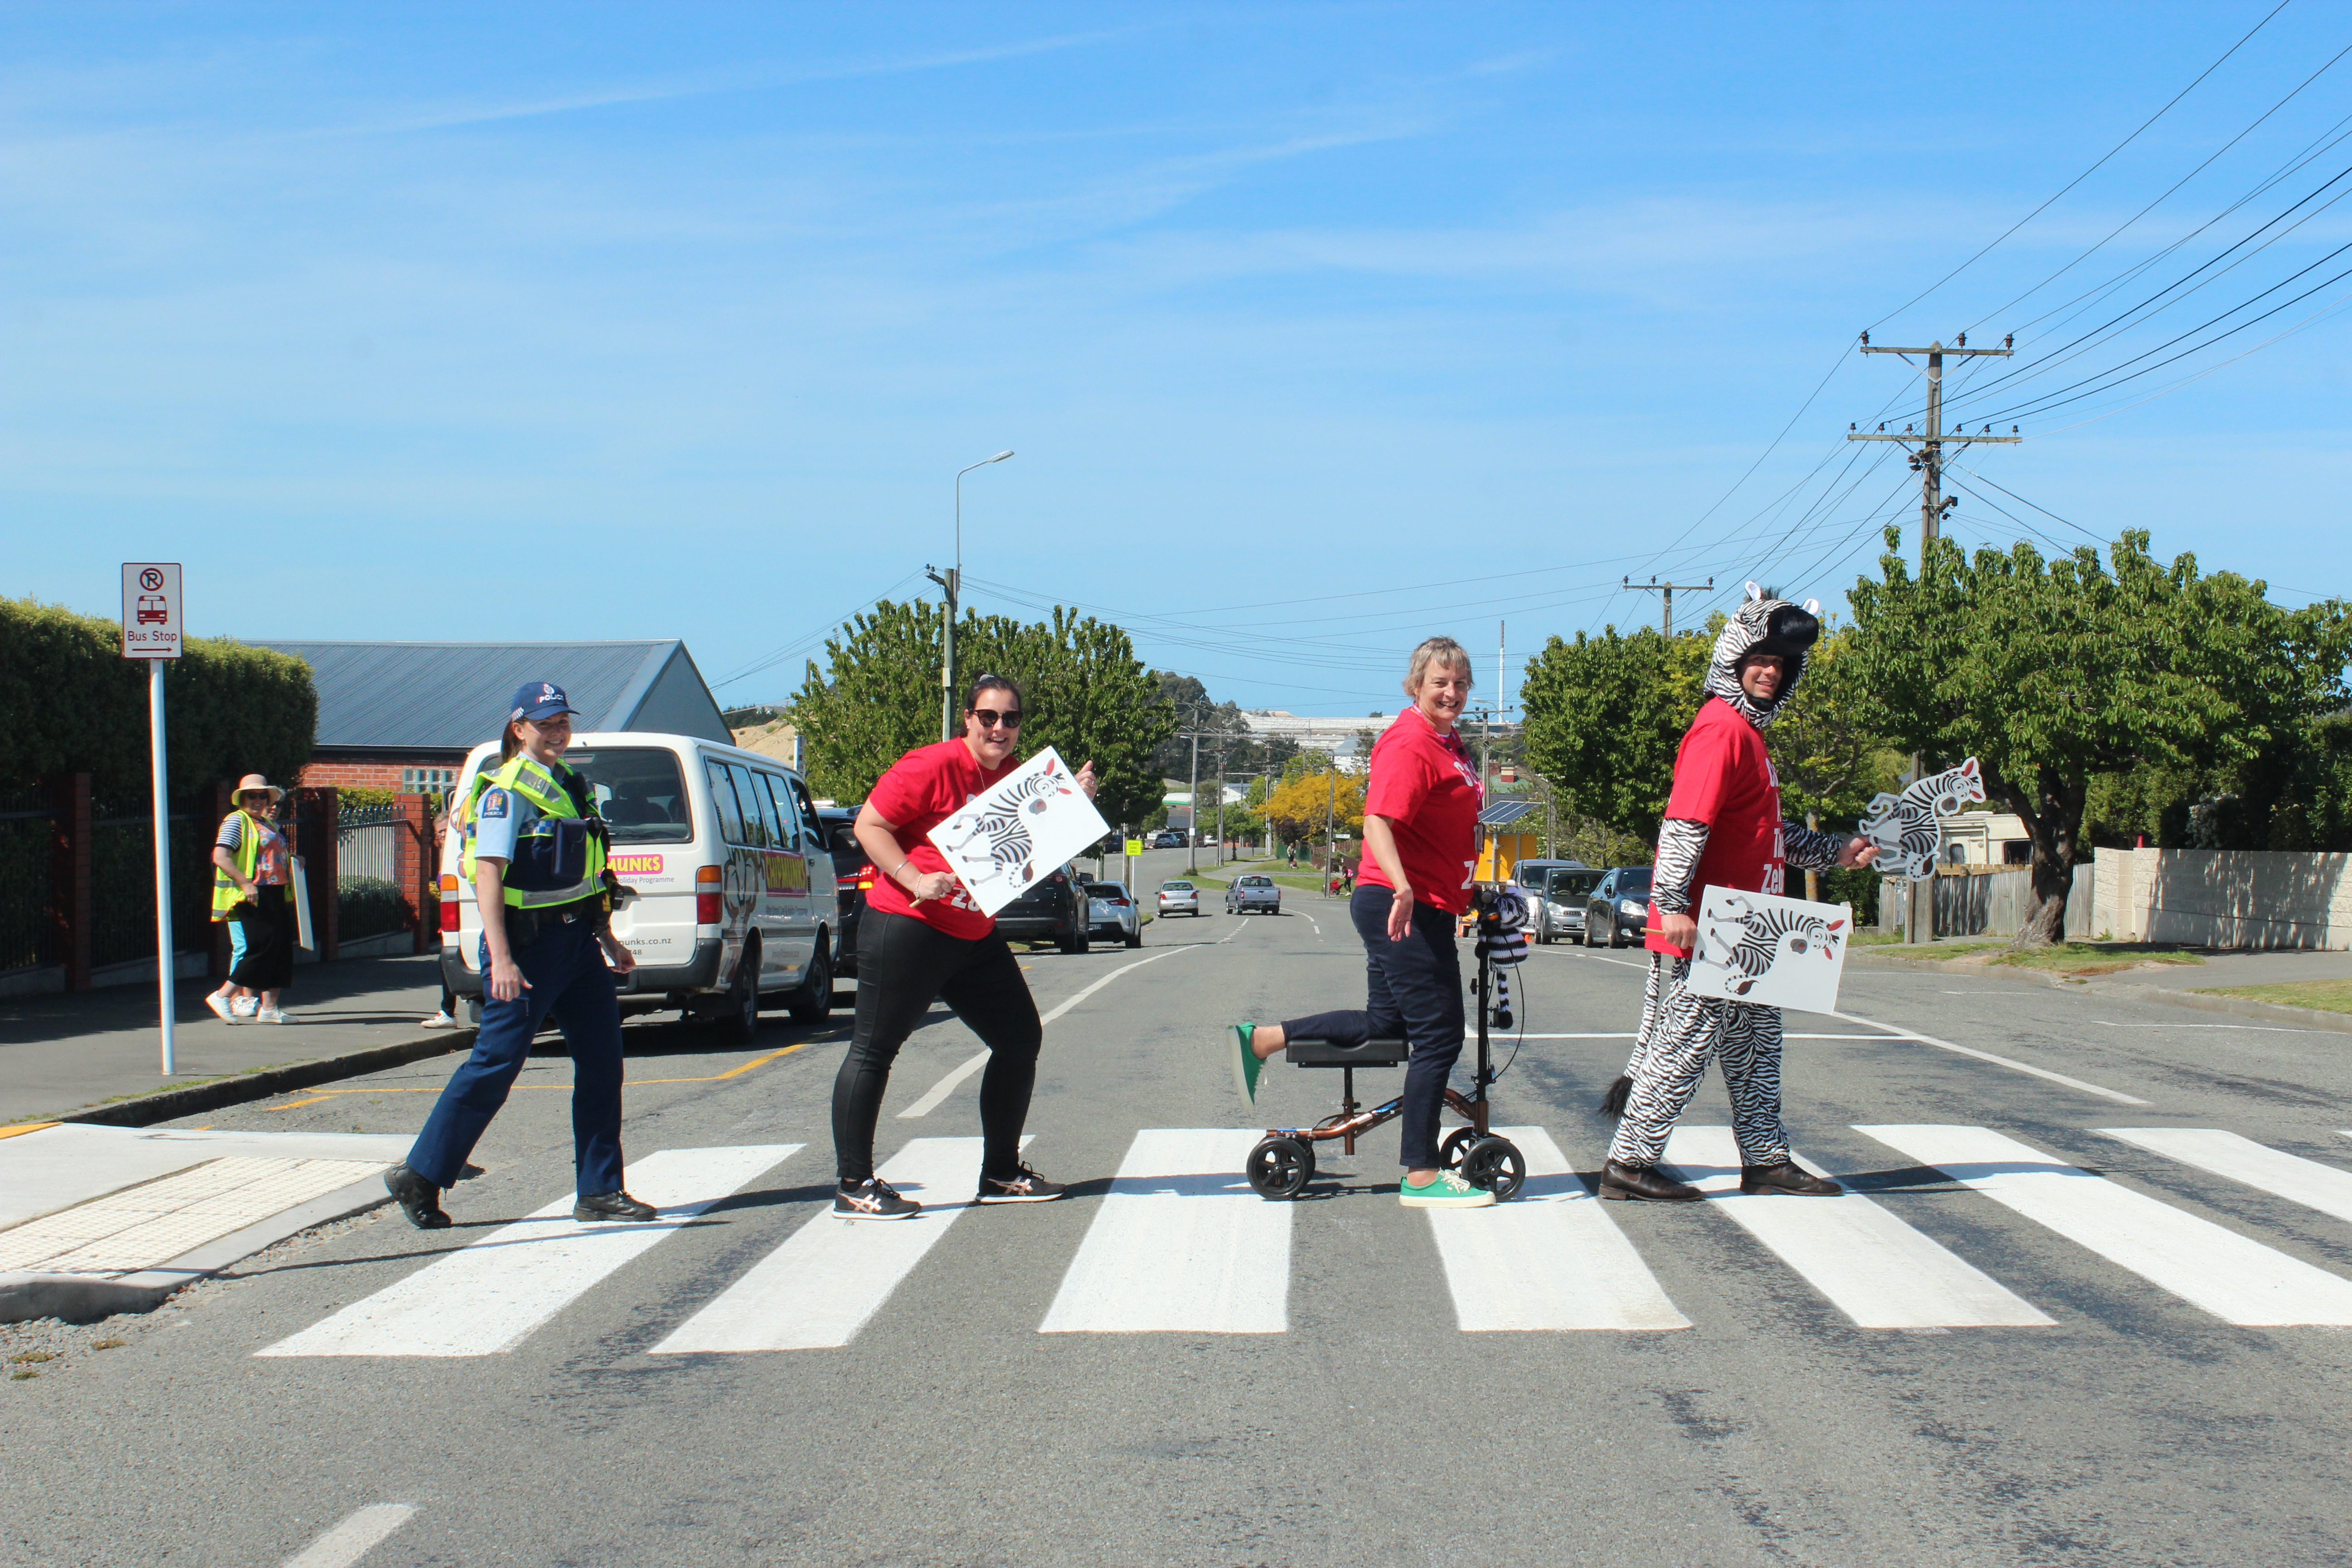 Representatives from Project Zebra organisations walking across a school zebra crossing - led by National Party MP-Elect for Rangitata James Meager dressed as mascot Zephyr the Zebra. Source: Timaru District Council. 